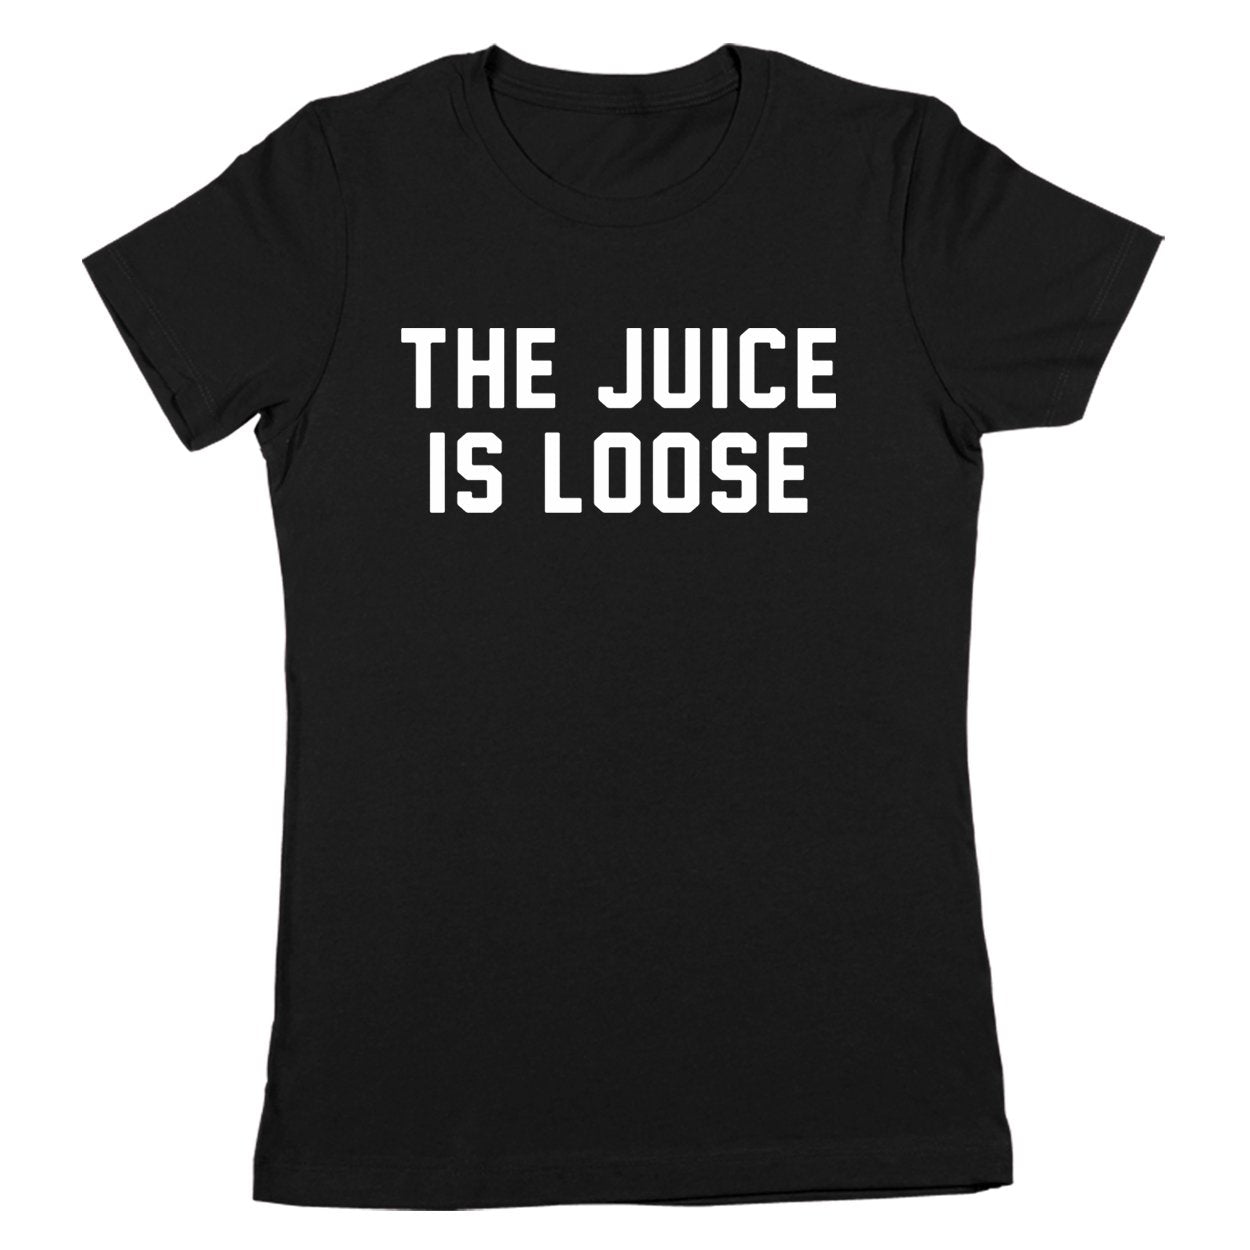 The Juice Is Loose Women's Fit T-Shirt